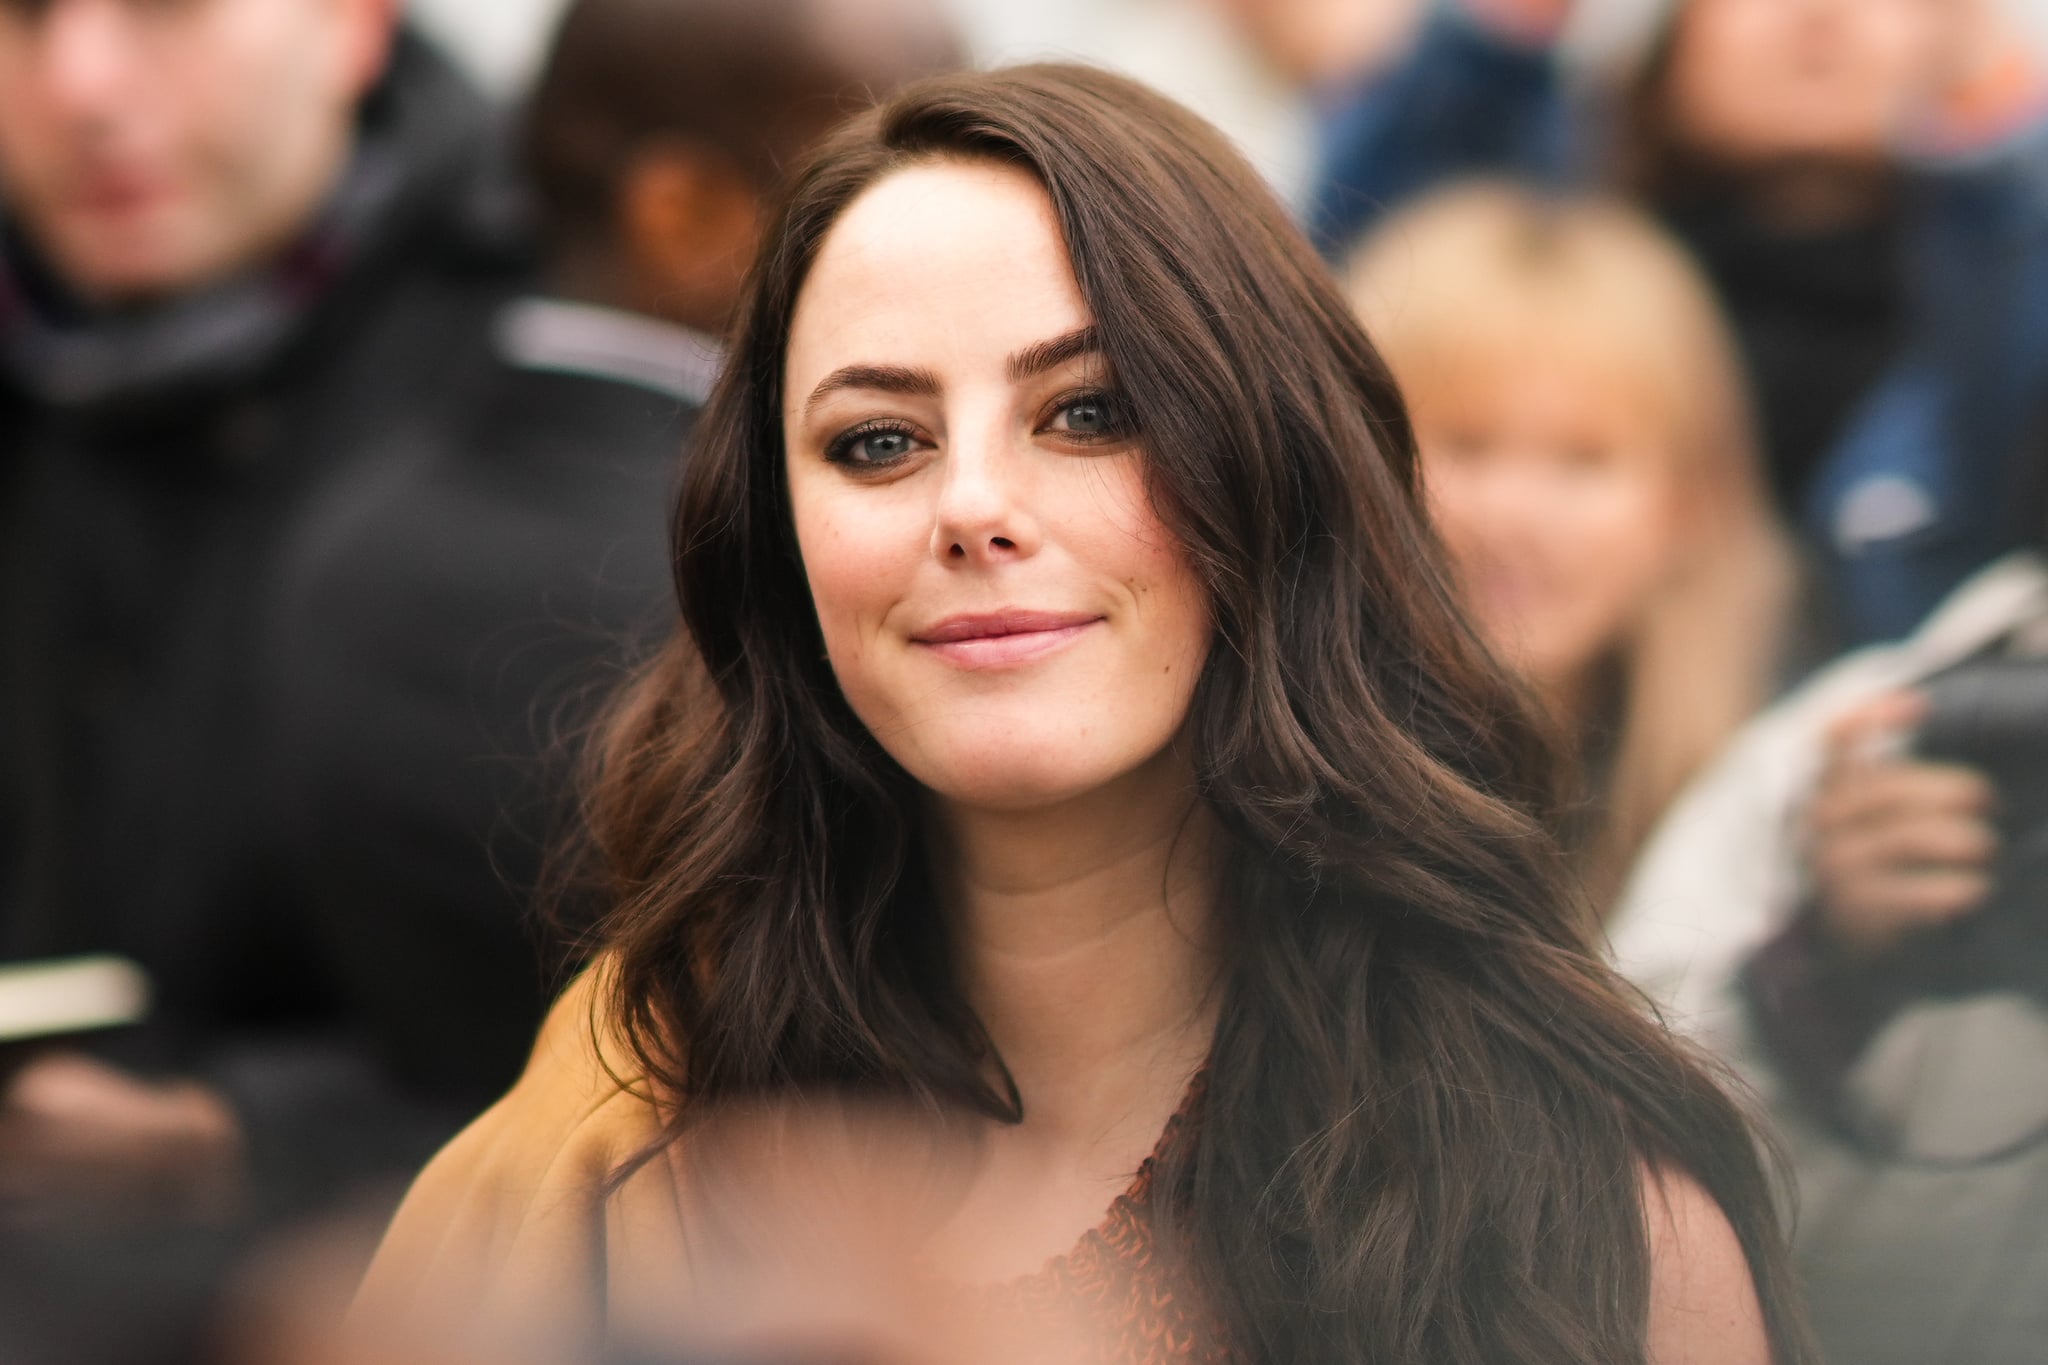 PARIS, FRANCE - MARCH 04: Kaya Scodelario is seen outside Loewe, during  Paris Fashion Week - Womenswear F/W 2022-2023, on March 04, 2022 in Paris, France. (Photo by Edward Berthelot/Getty Images)